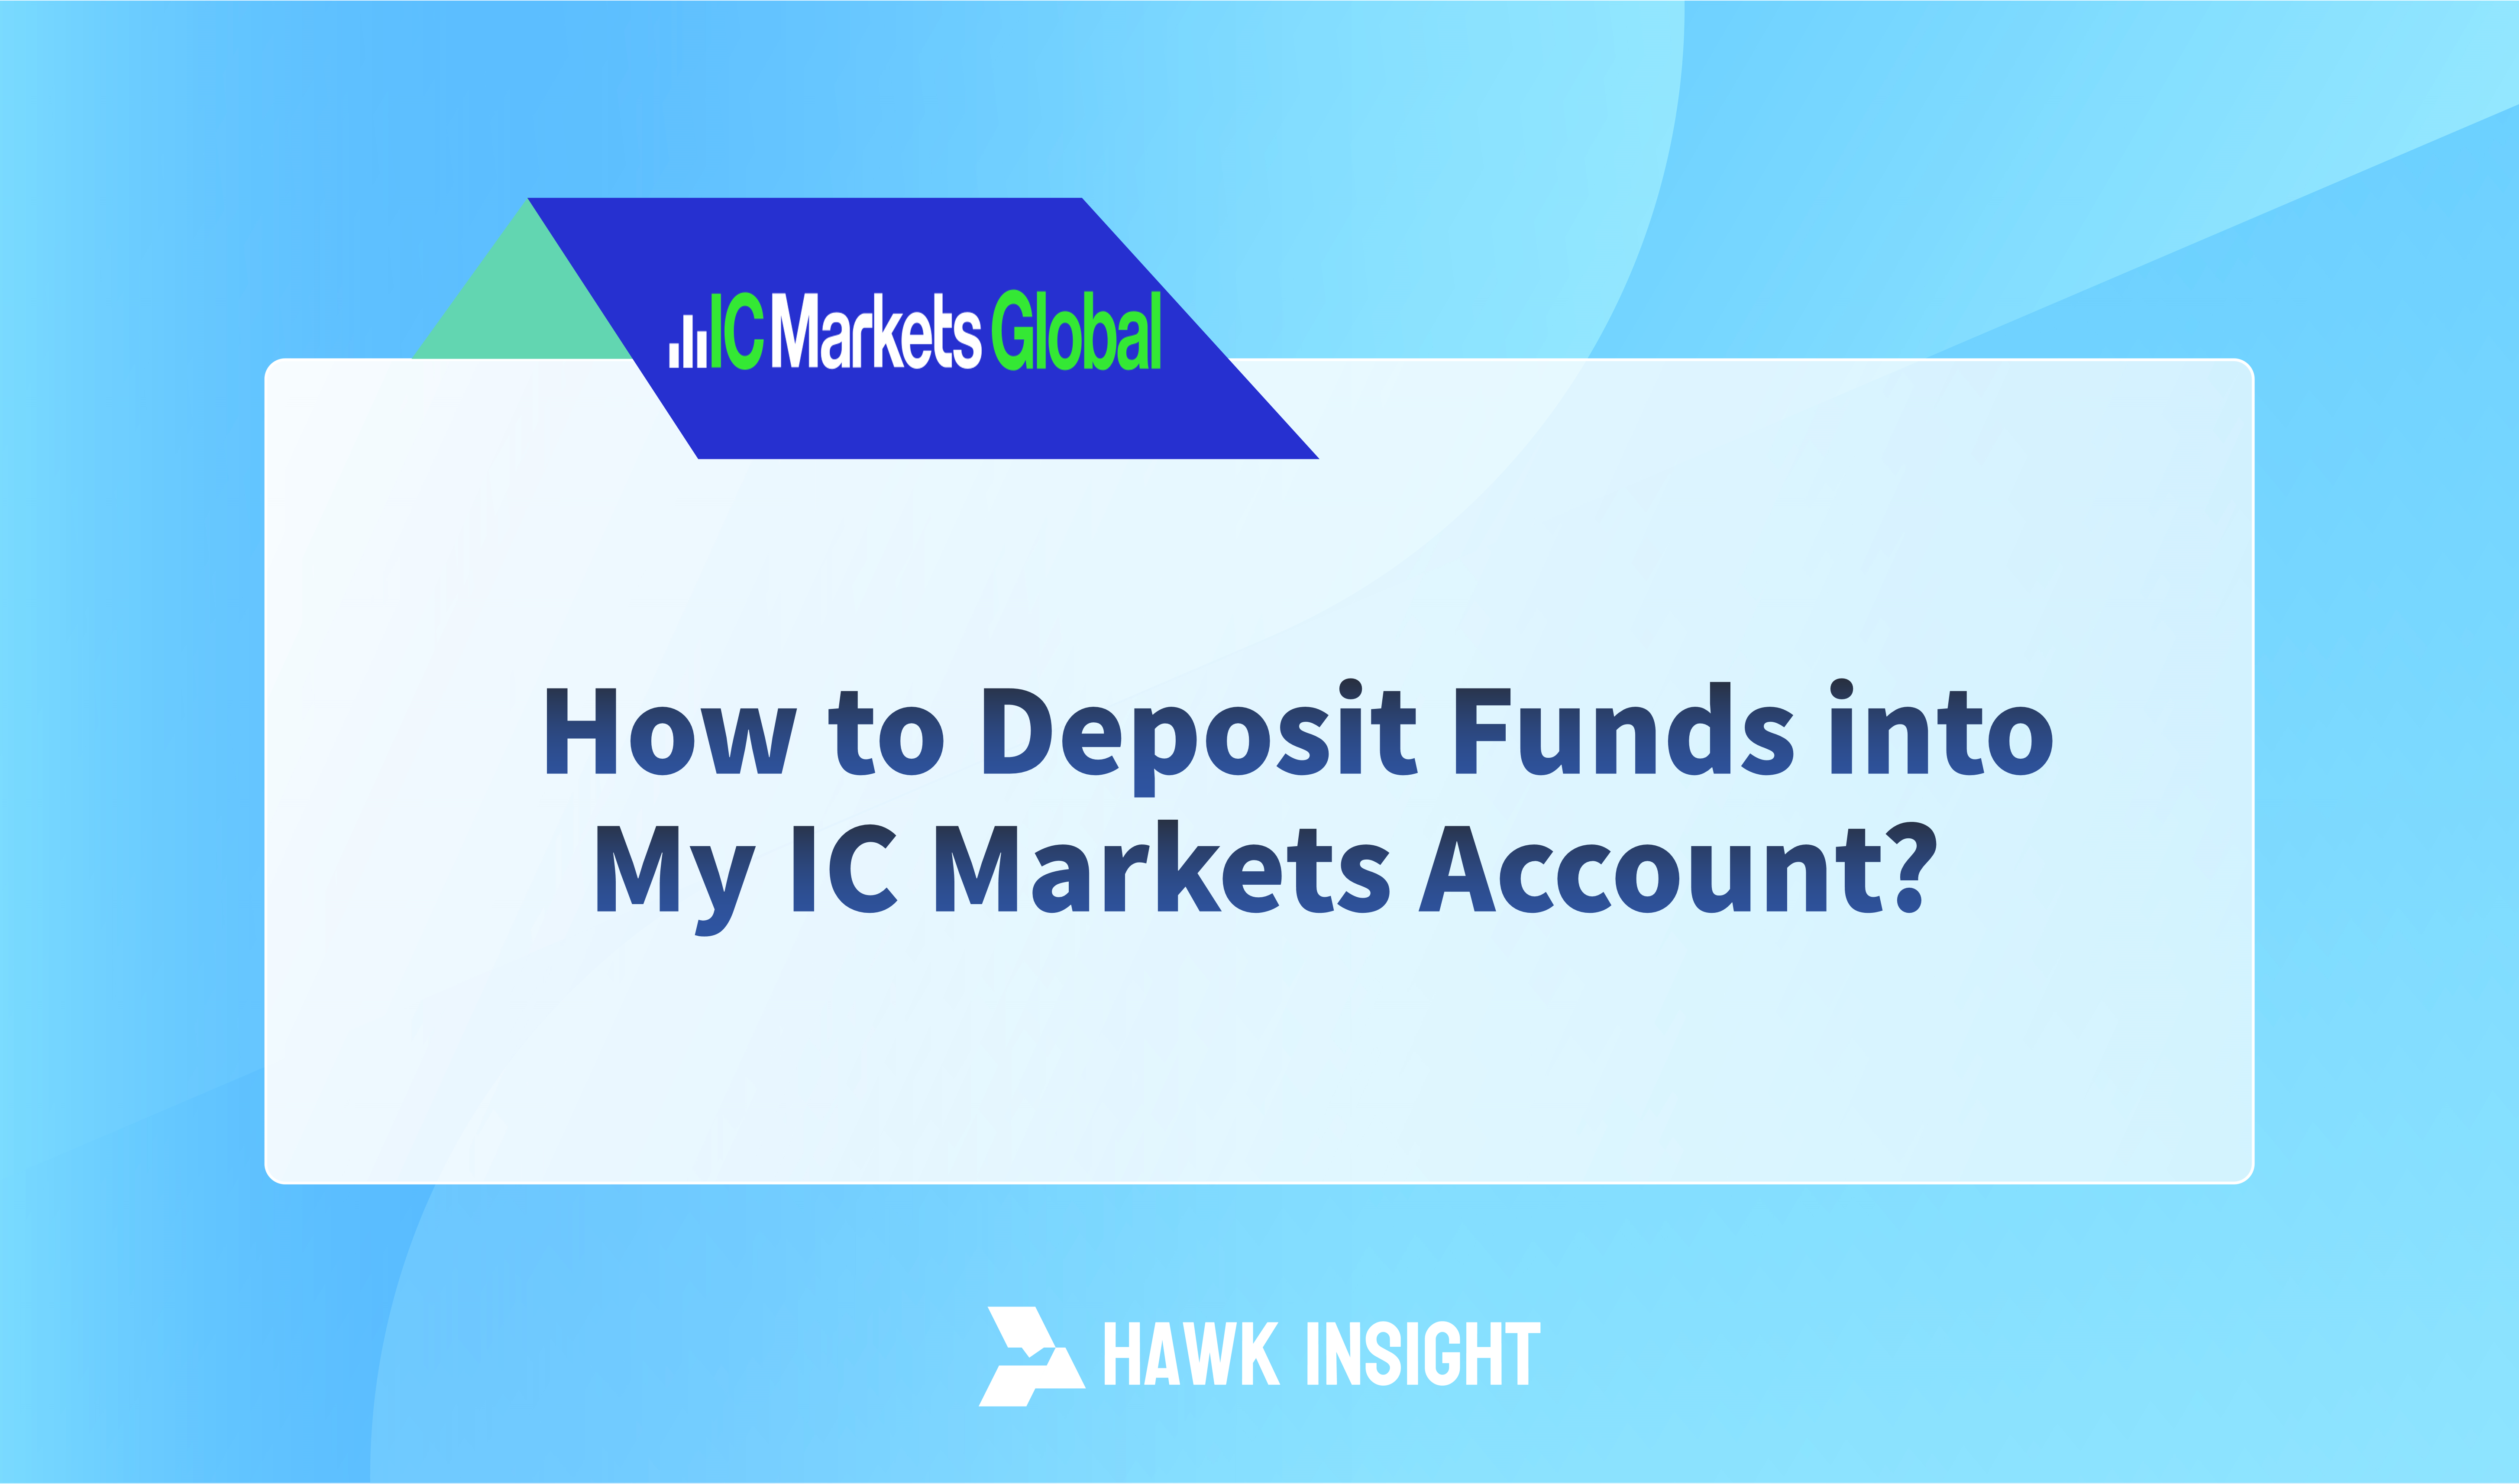 How to Deposit Funds into My IC Markets Account?